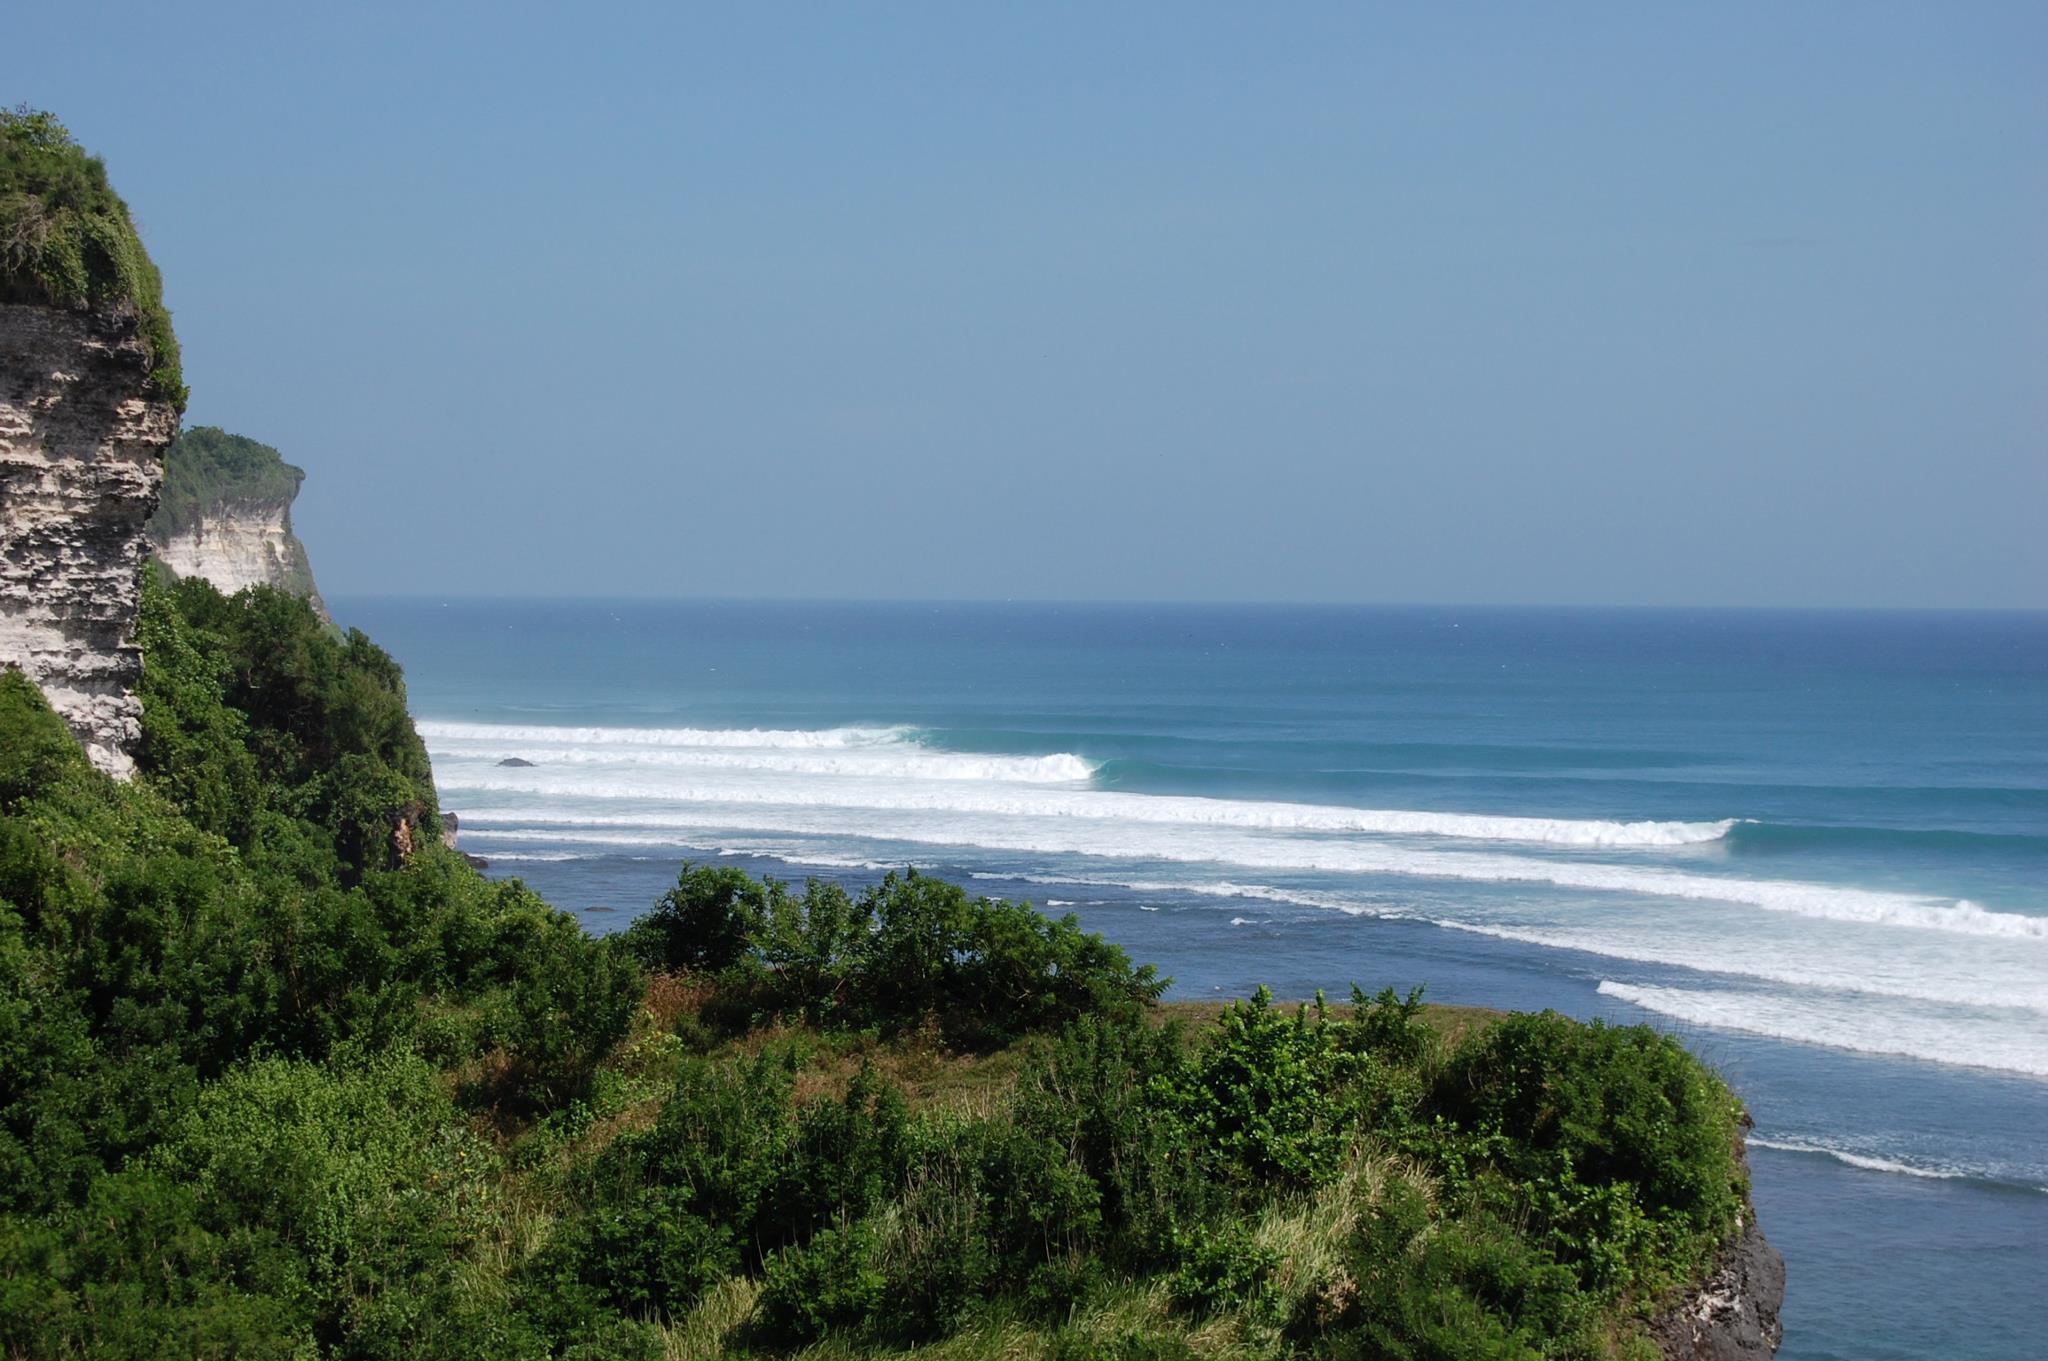 How to travel to Bali